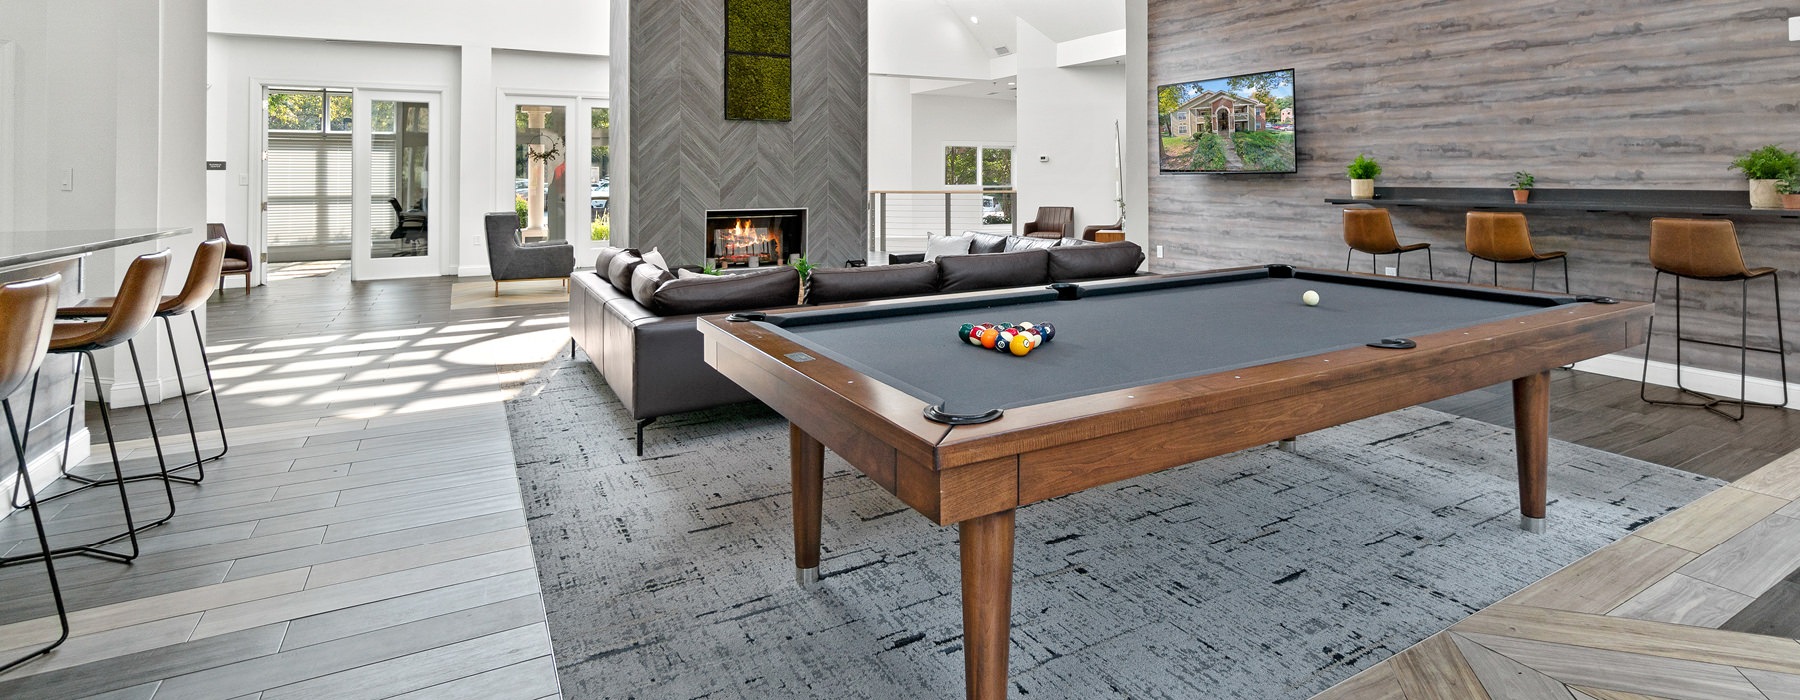 Game room with billiards set